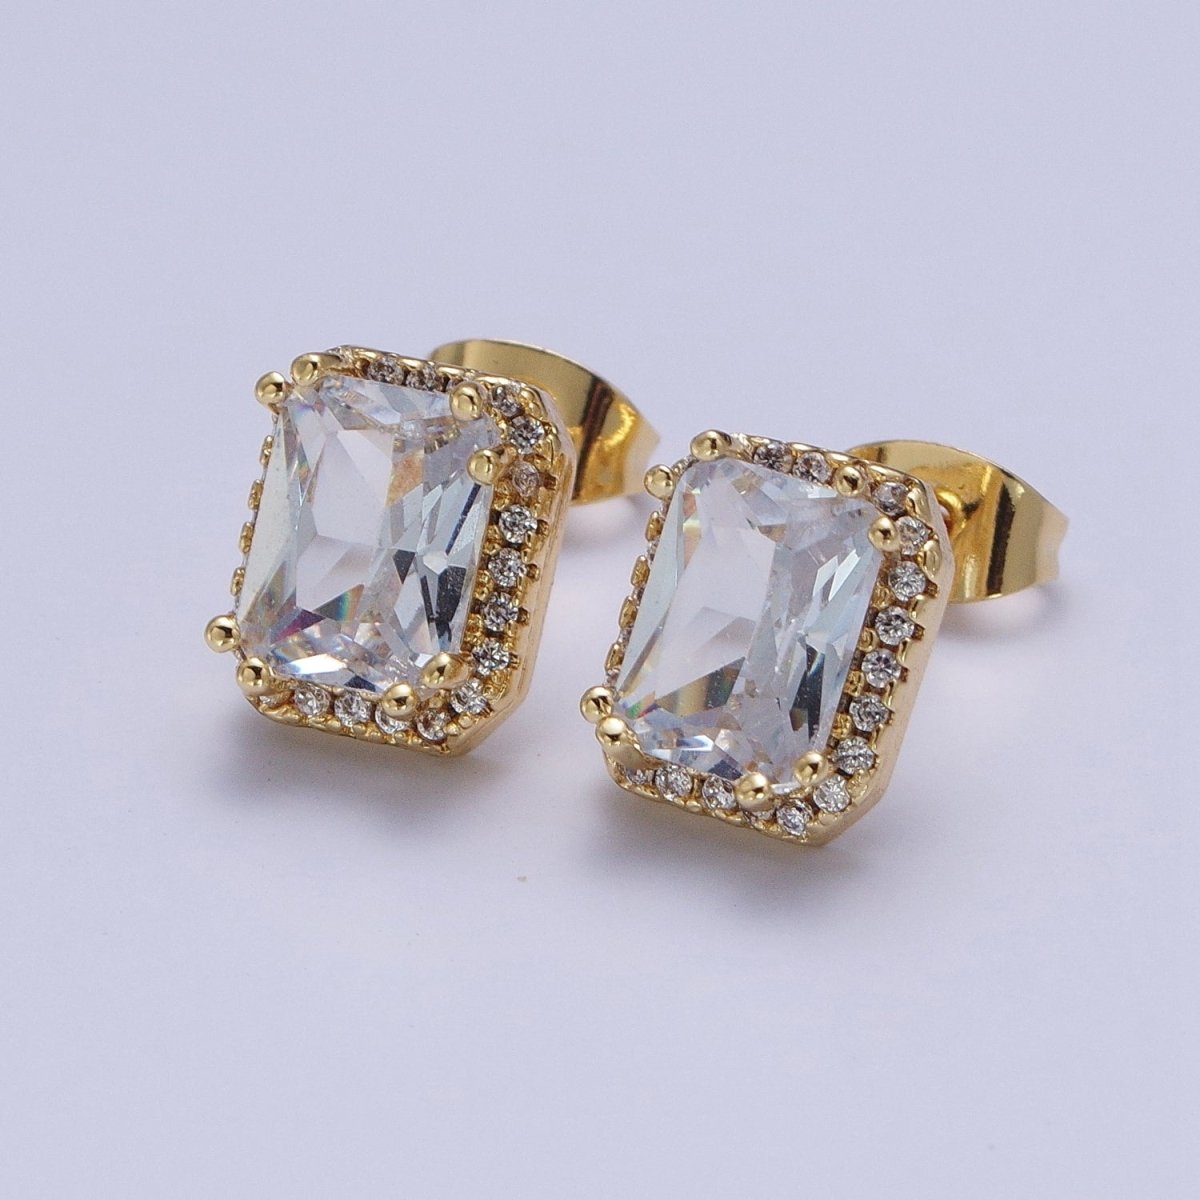 Micro Paved Clear Pink Purple Green Baguette Cubic Zirconia Gold Stud Earrings | X-896-X-899 - DLUXCA